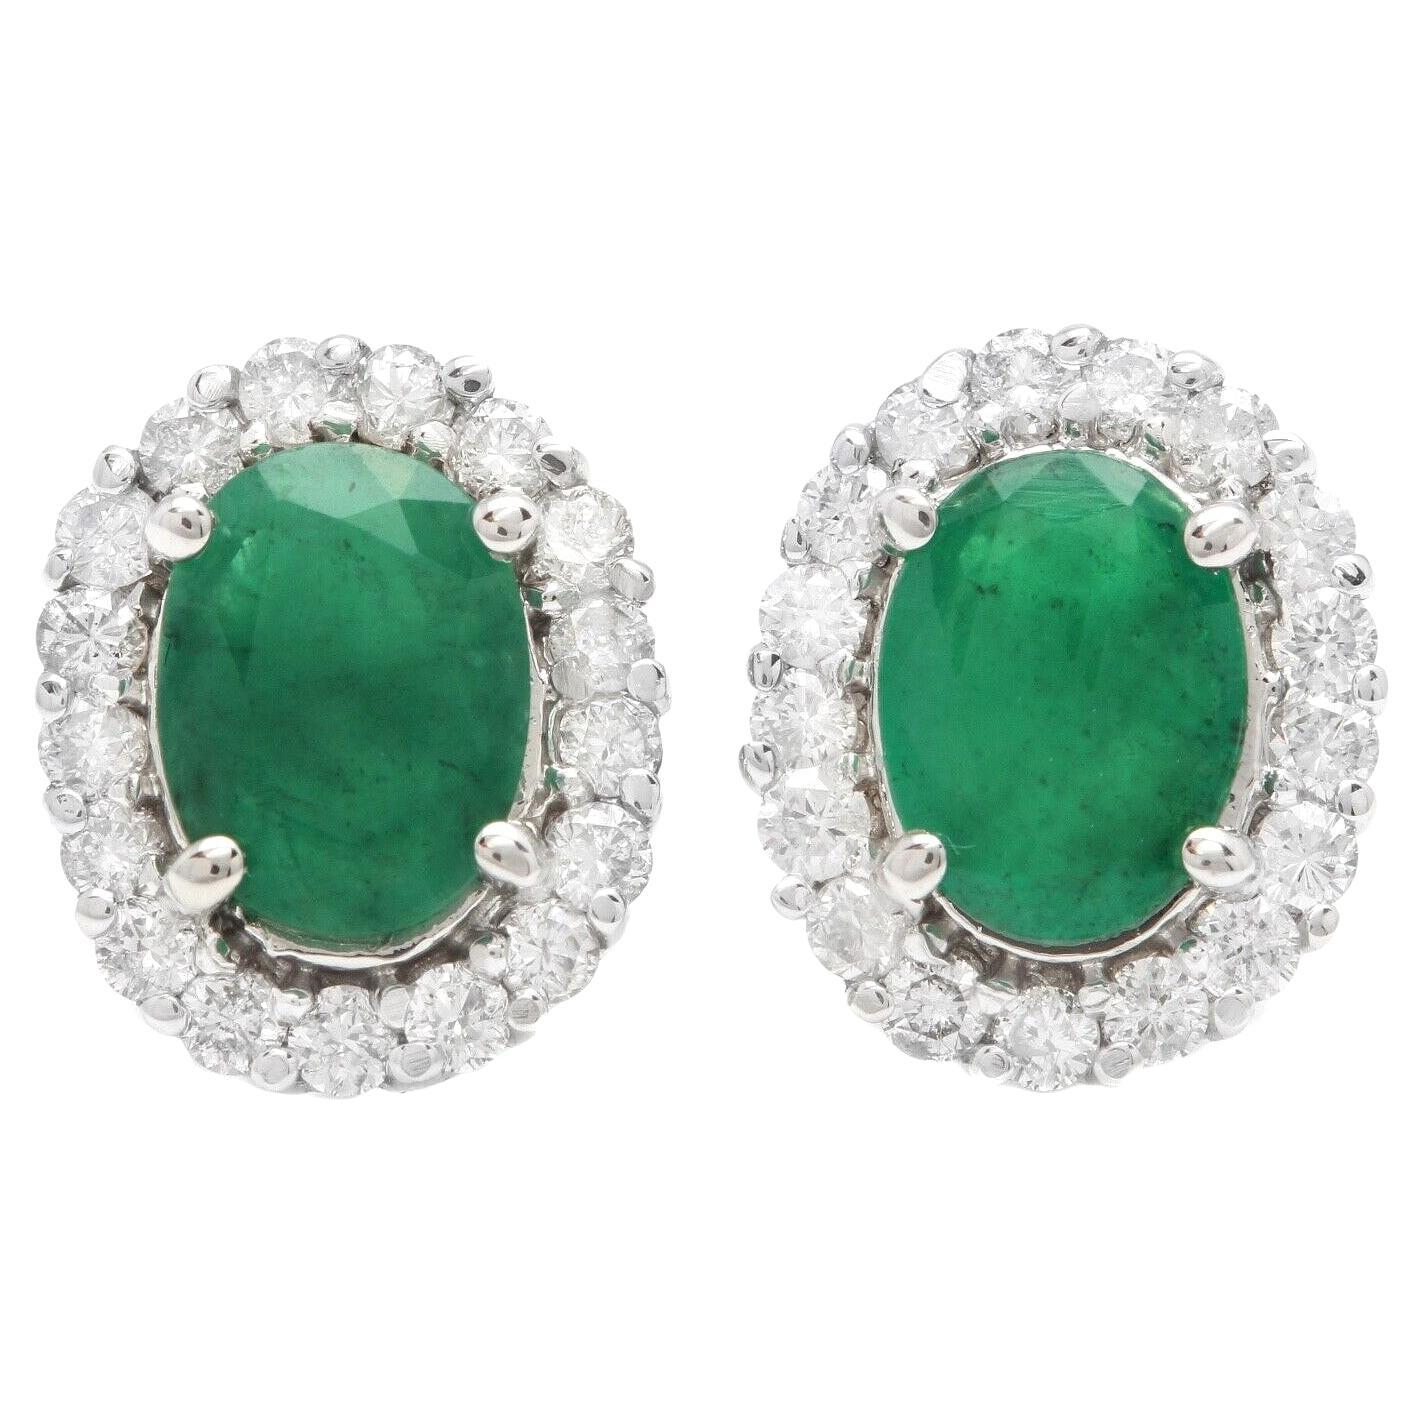 3.05 Carats Natural Emerald and Diamond 14k Solid White Gold Earrings